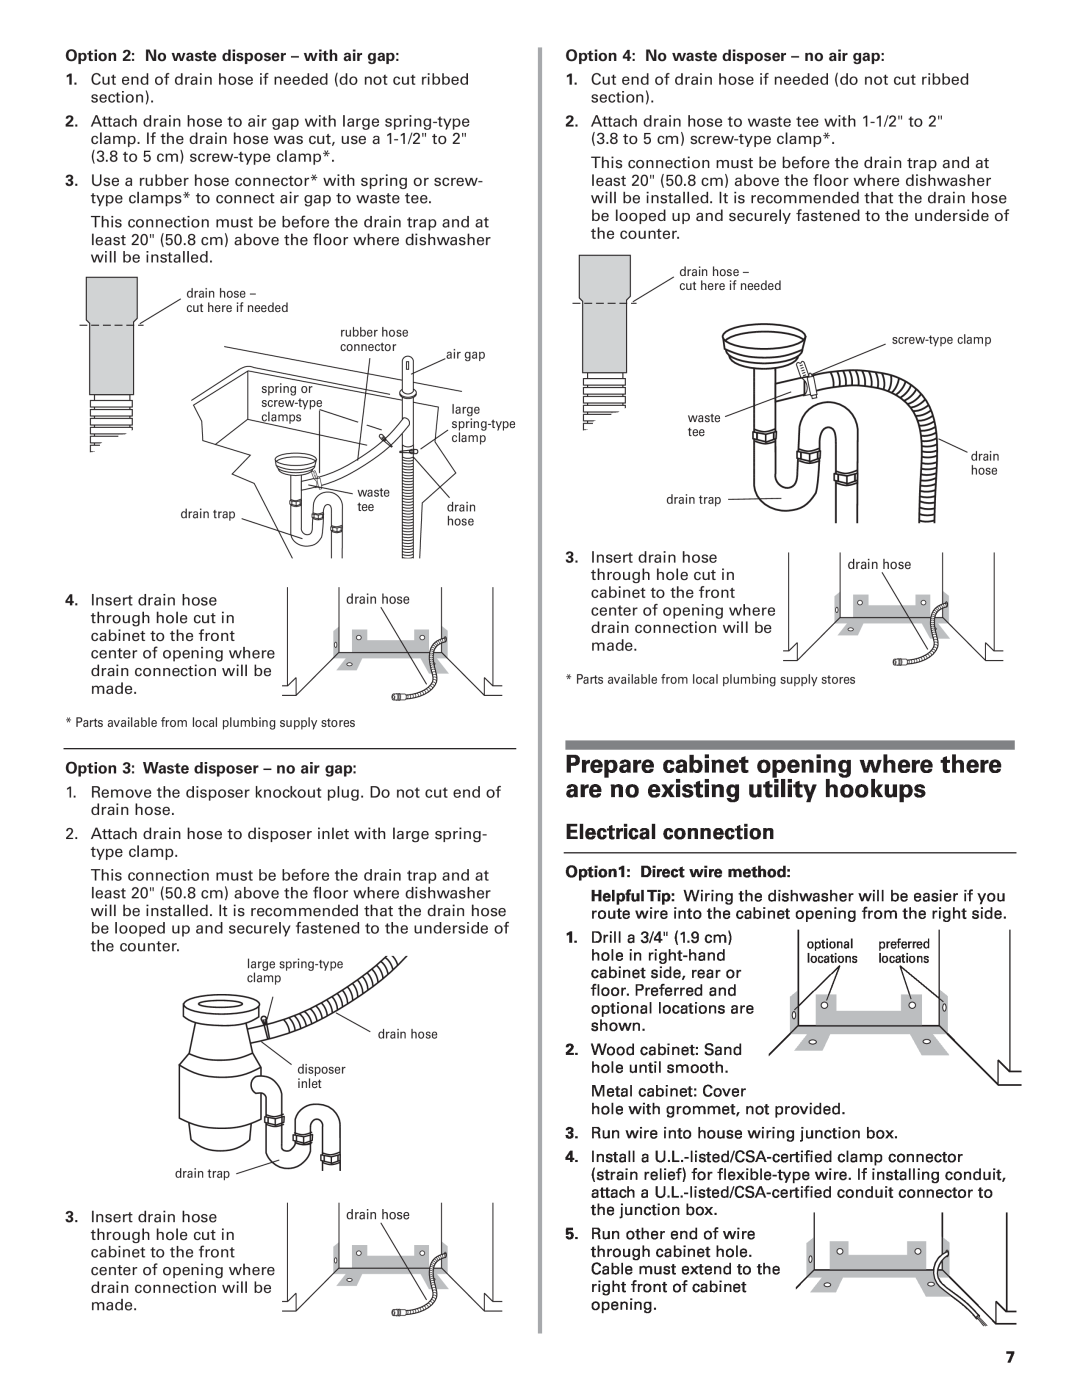 KitchenAid 8564554 Prepare cabinet opening where there are no existing utility hookups, Electrical connection 